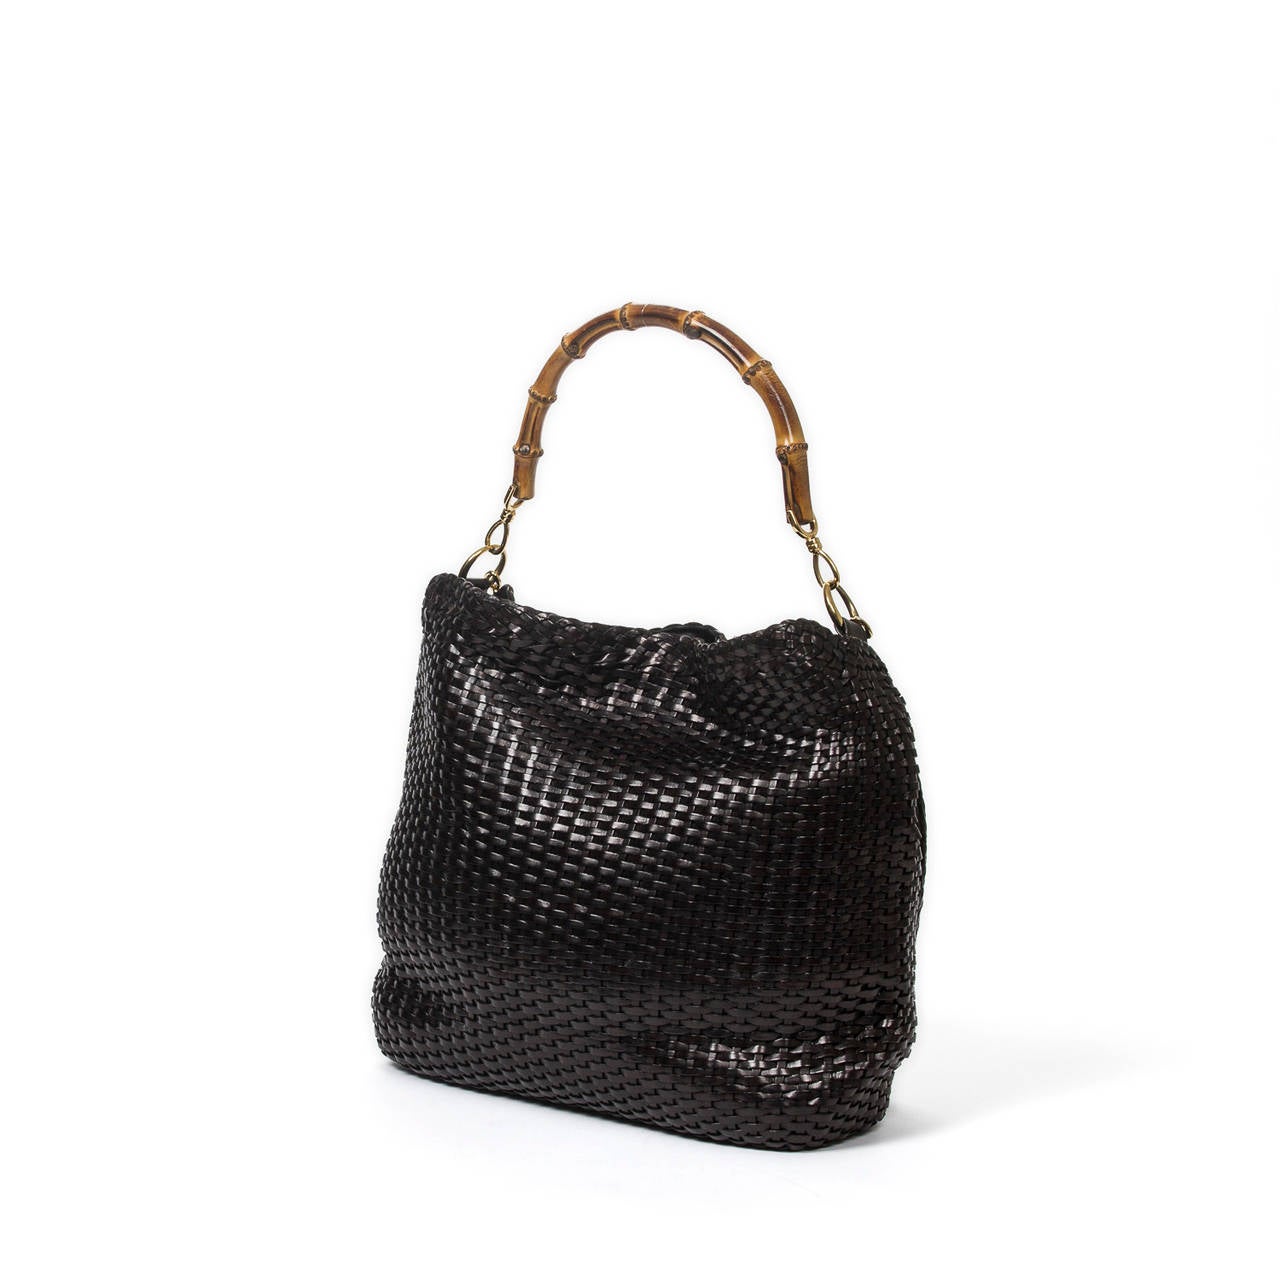 Handbag in black woven leather with bamboo handle with braided strap, gold tone hardware. Black suede interior with zip pocket. Few scuffs on the leather, Perfect condition.